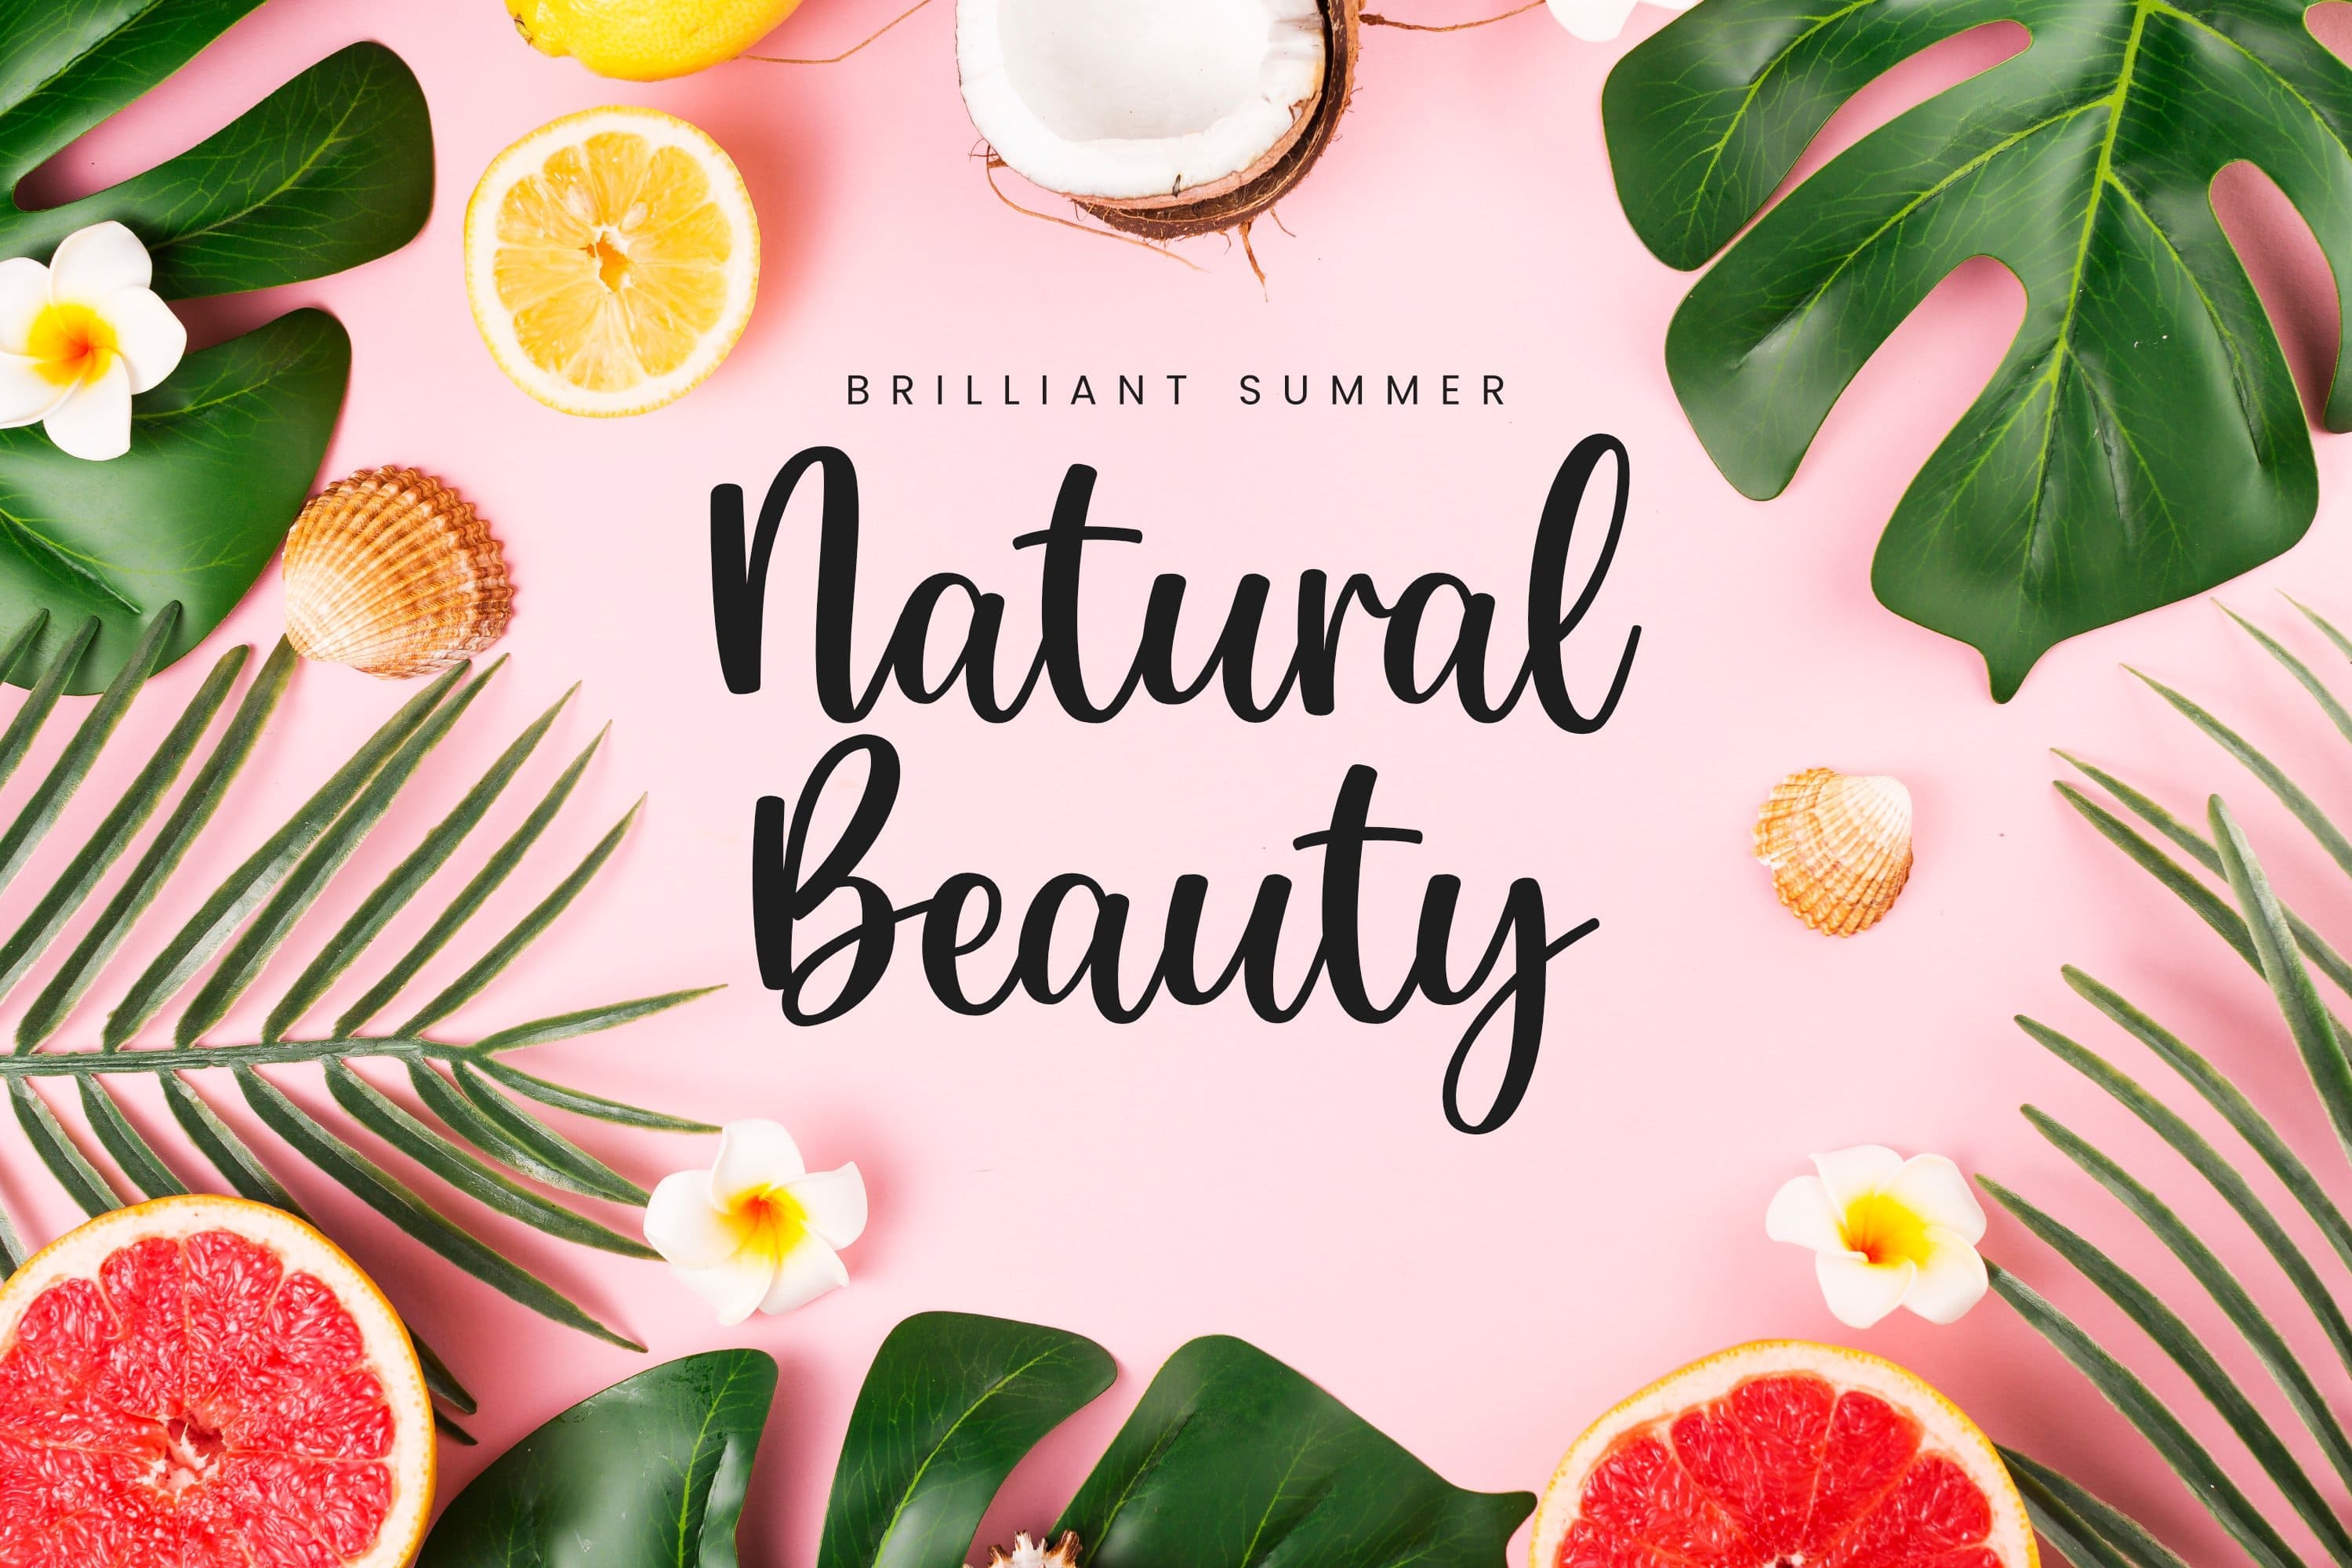 Headline "Natural beauty" on a pink background with fruits.